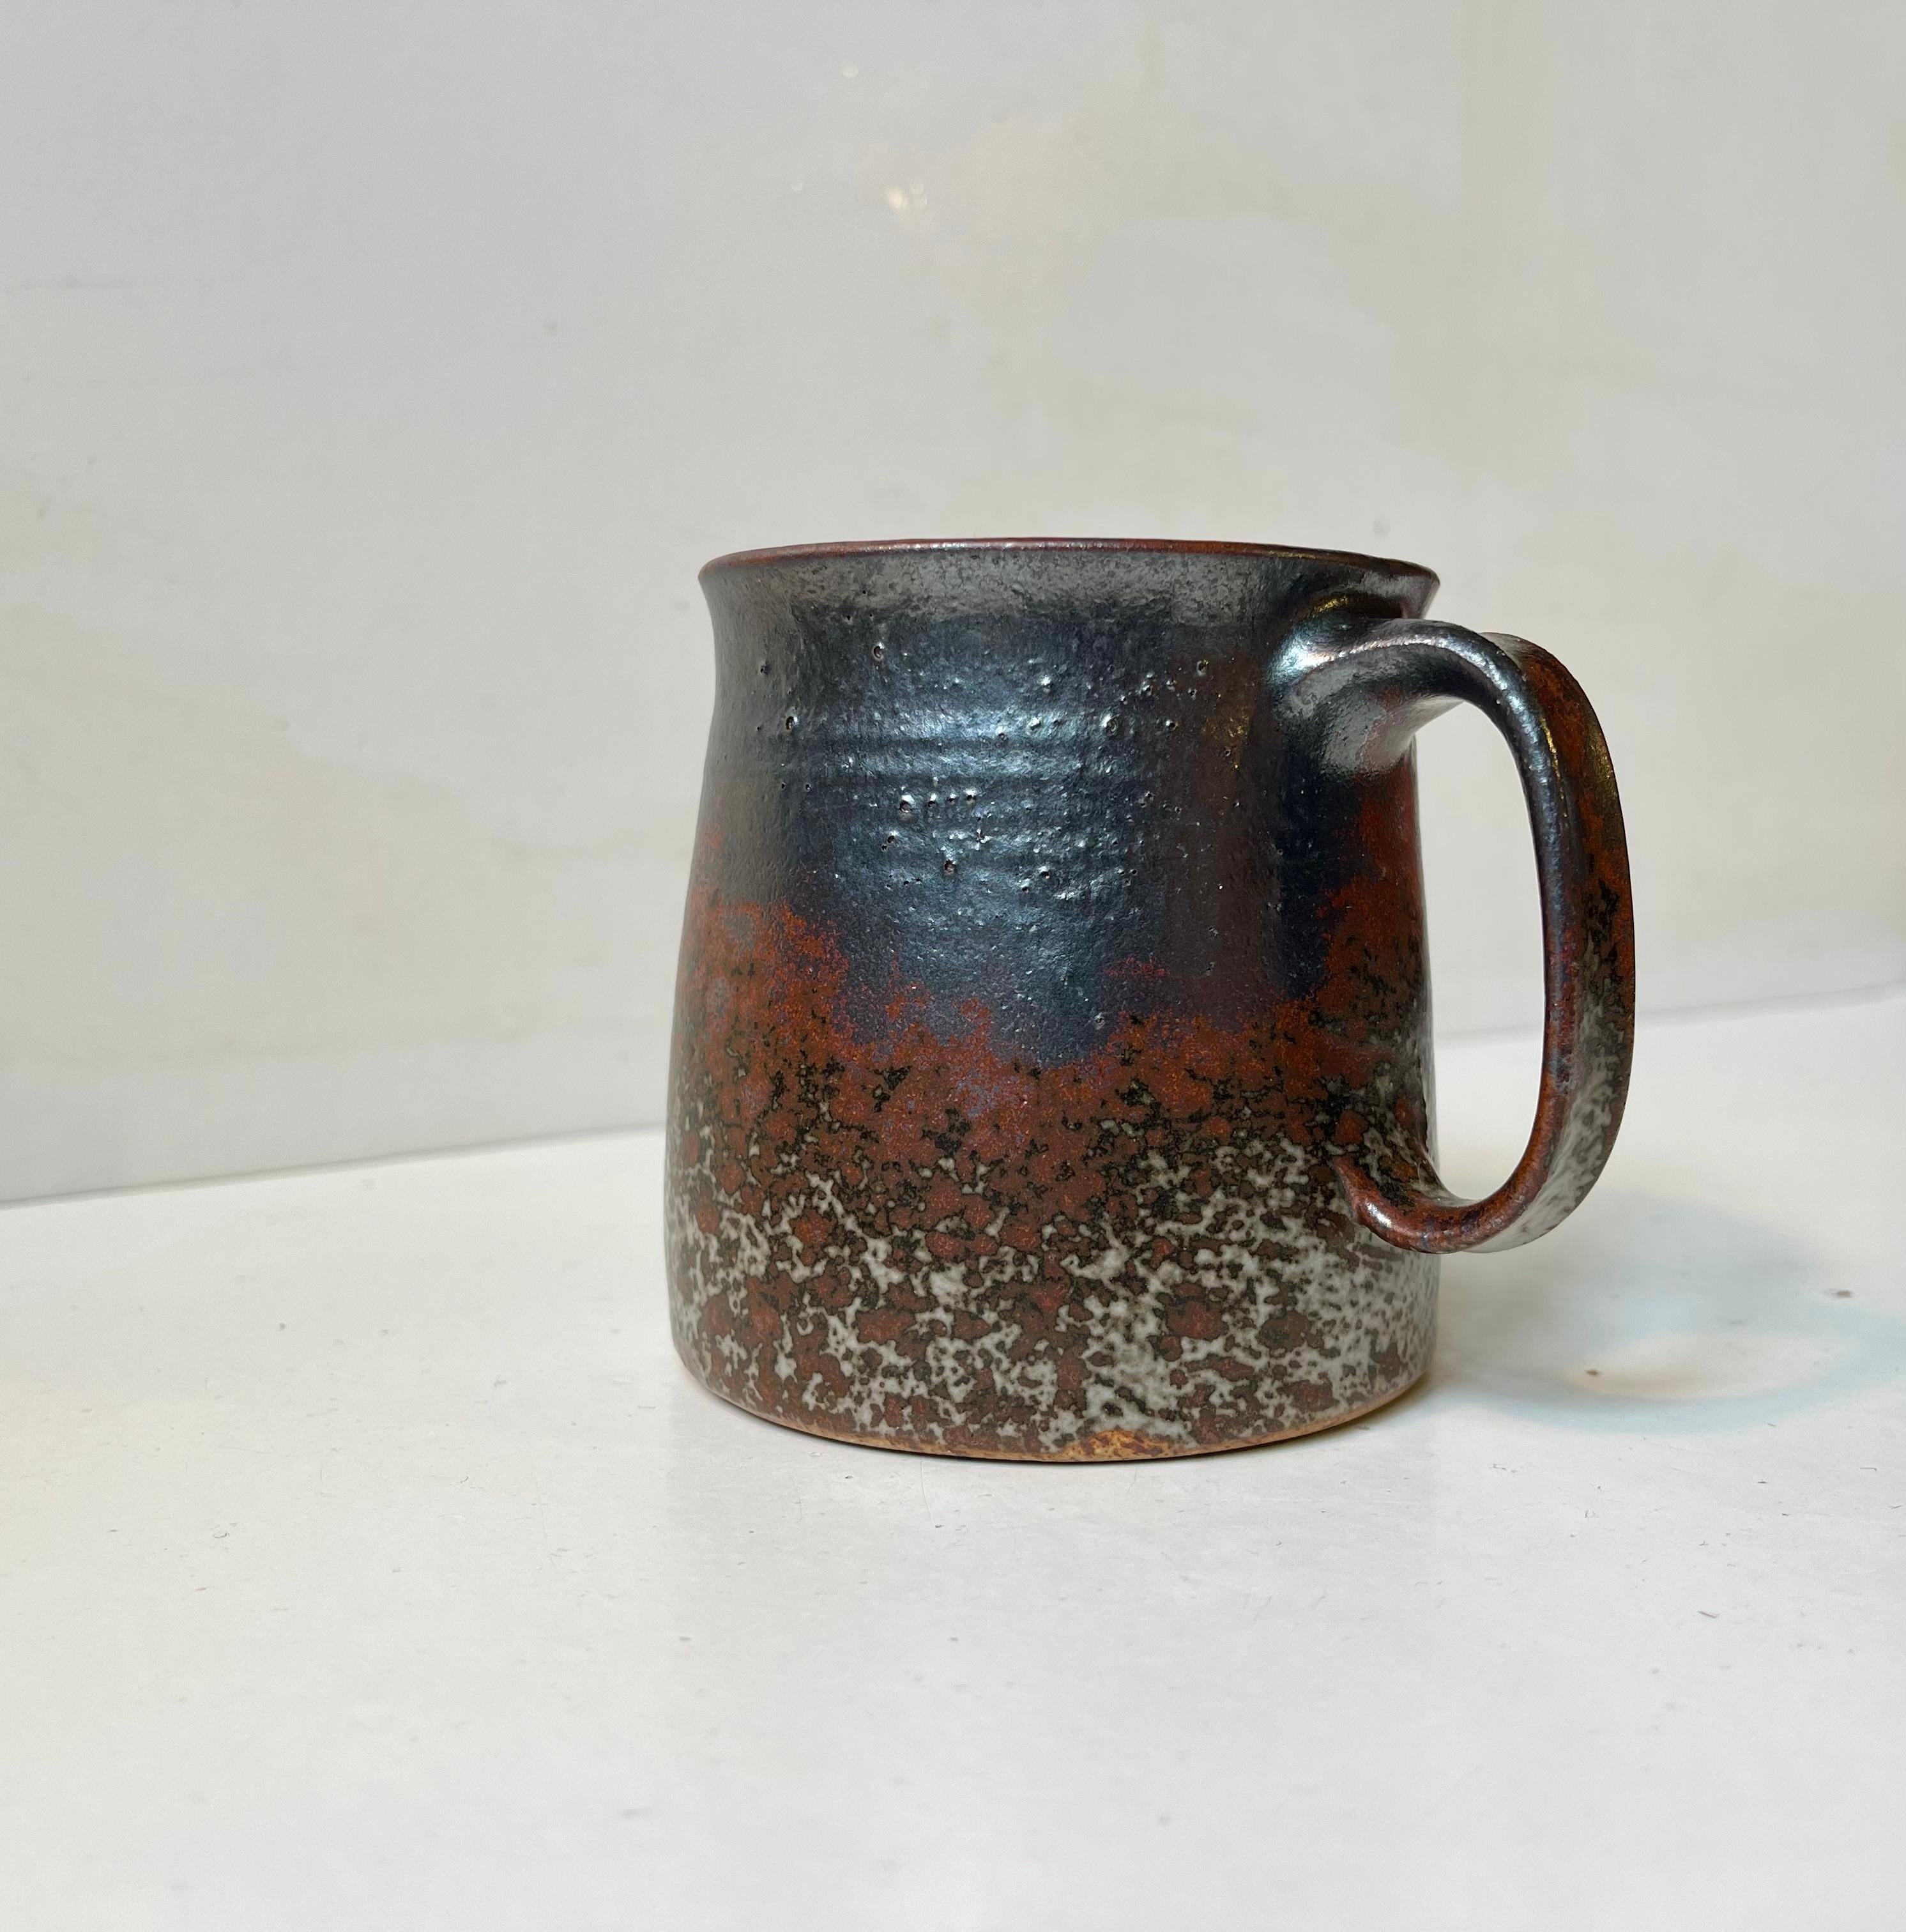 Danish Jacob E. Bang Small Stoneware Jug in Earthy Glazes, 1960s For Sale